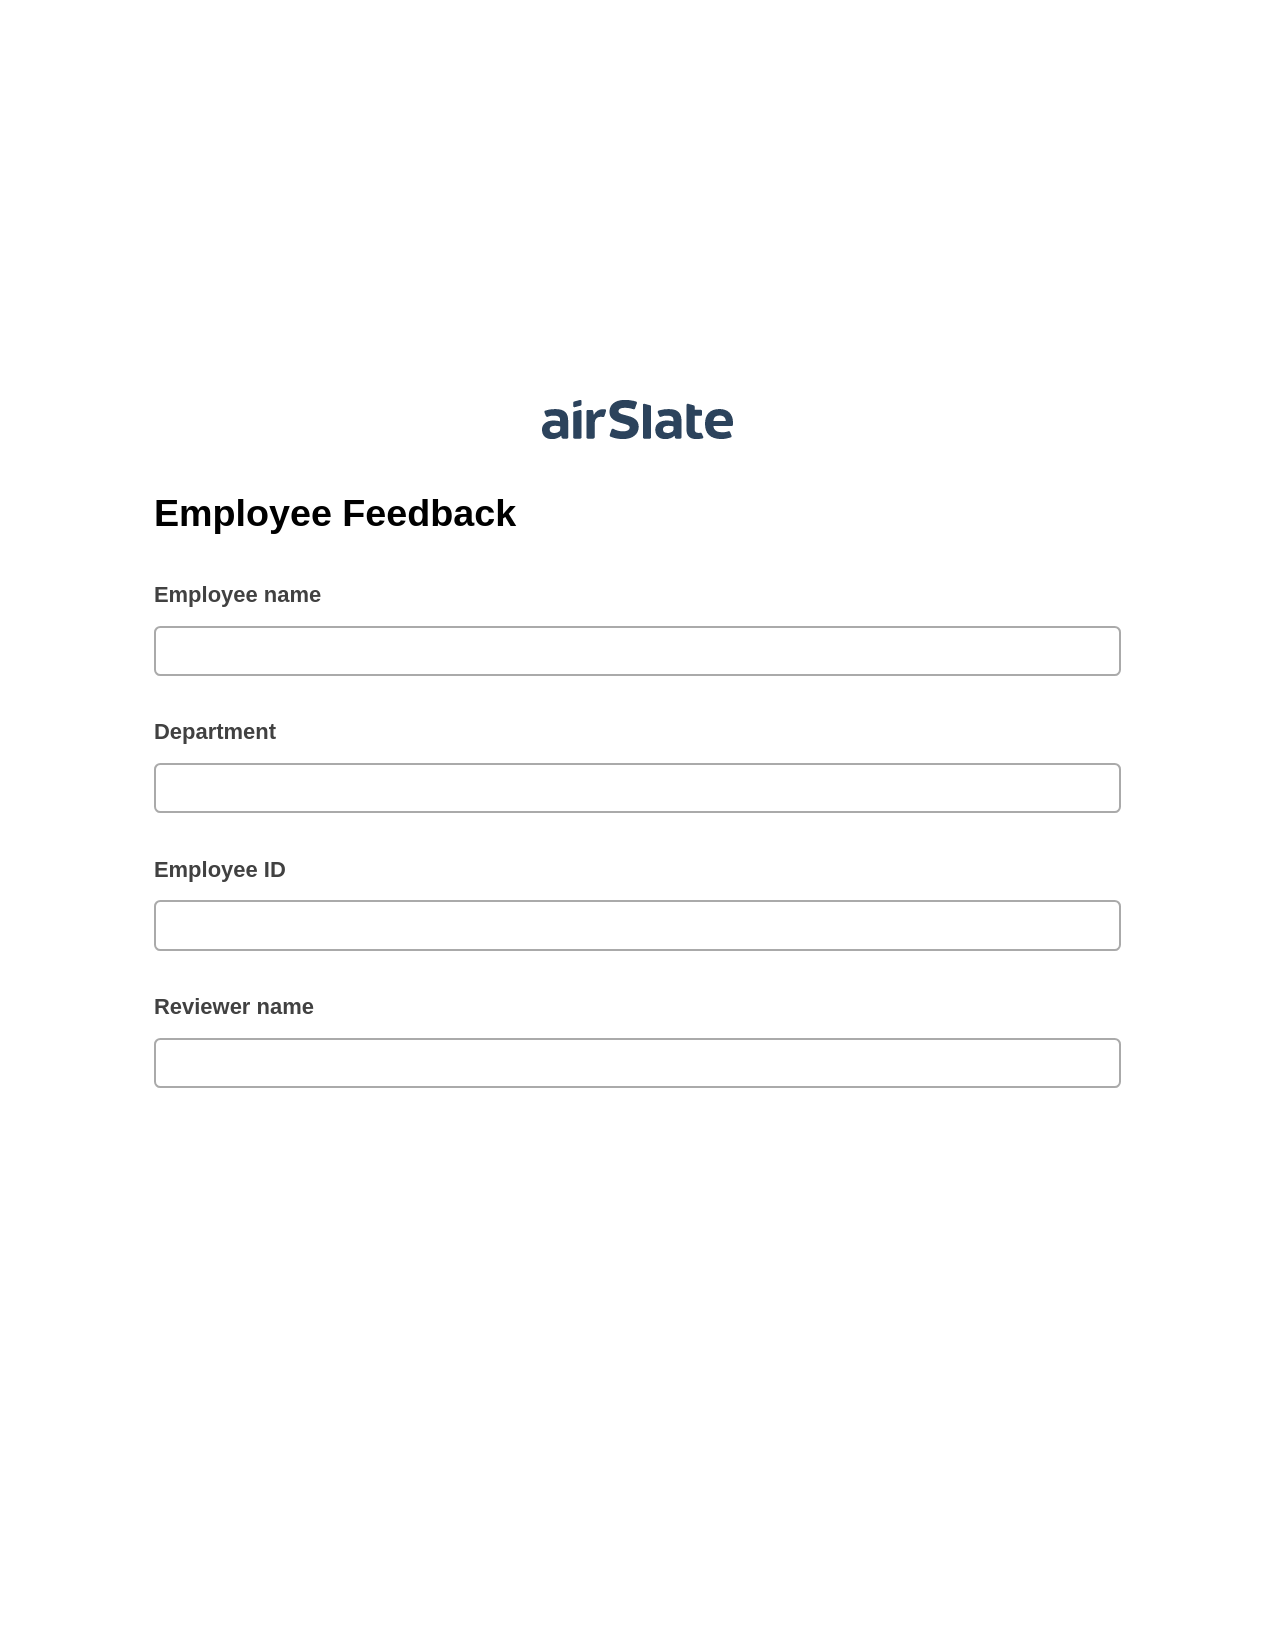 Employee Feedback Pre-fill from Salesforce Record Bot, In-person Signing Bot, Post-finish Document Bot